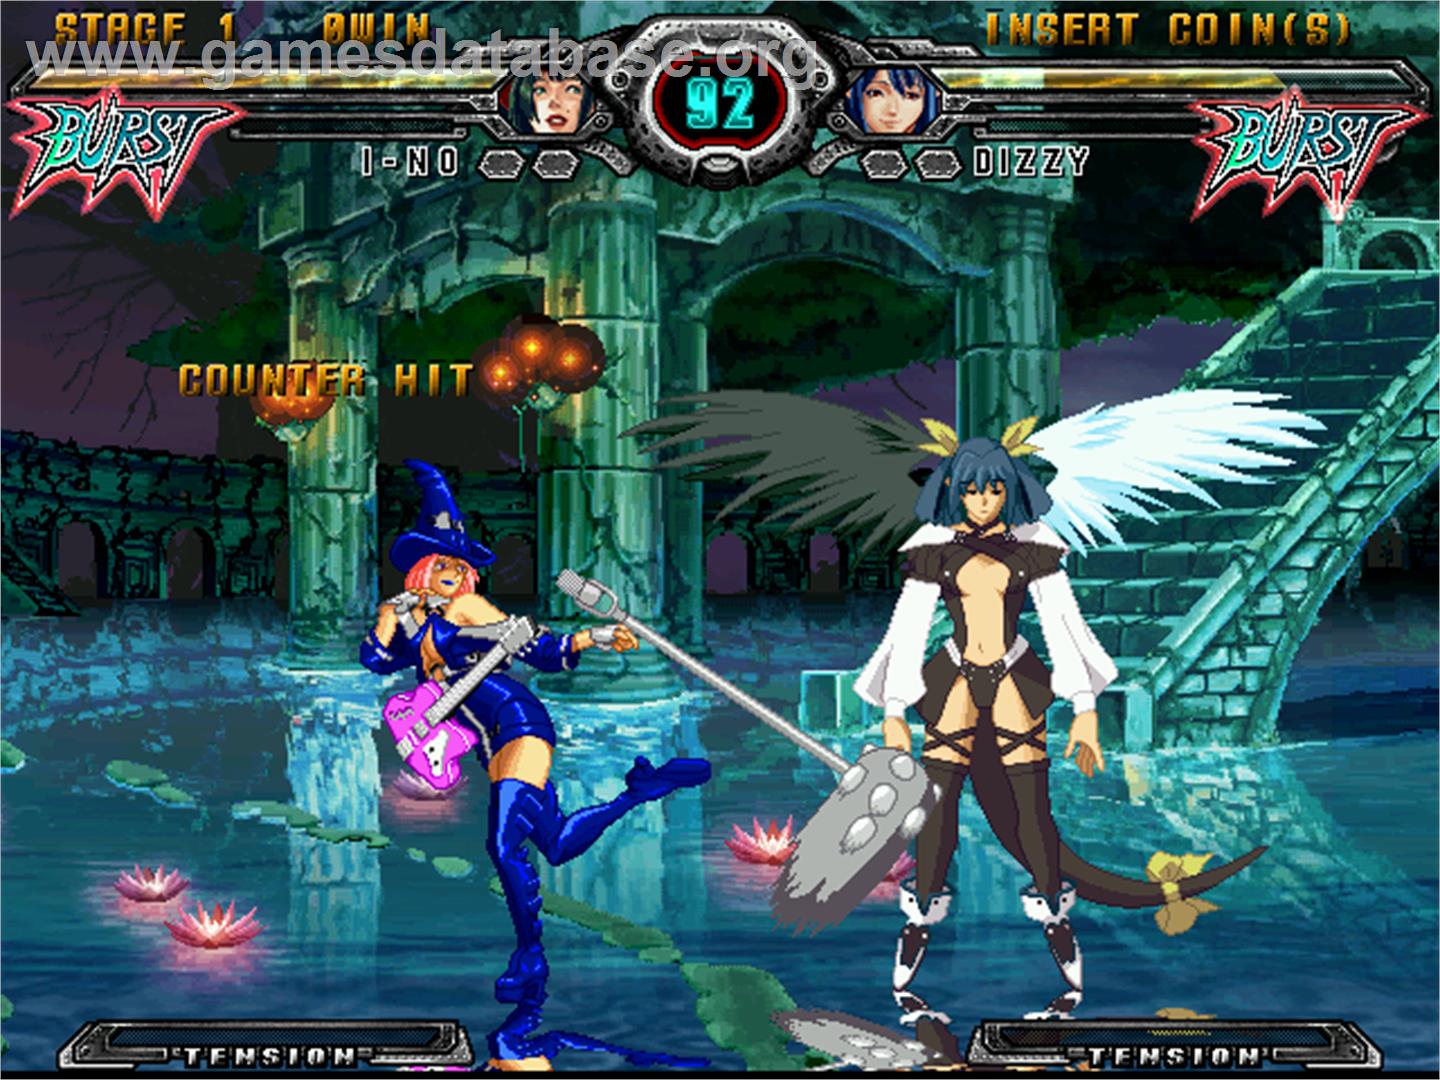 Guilty Gear XX Accent Core - Arcade - Artwork - In Game